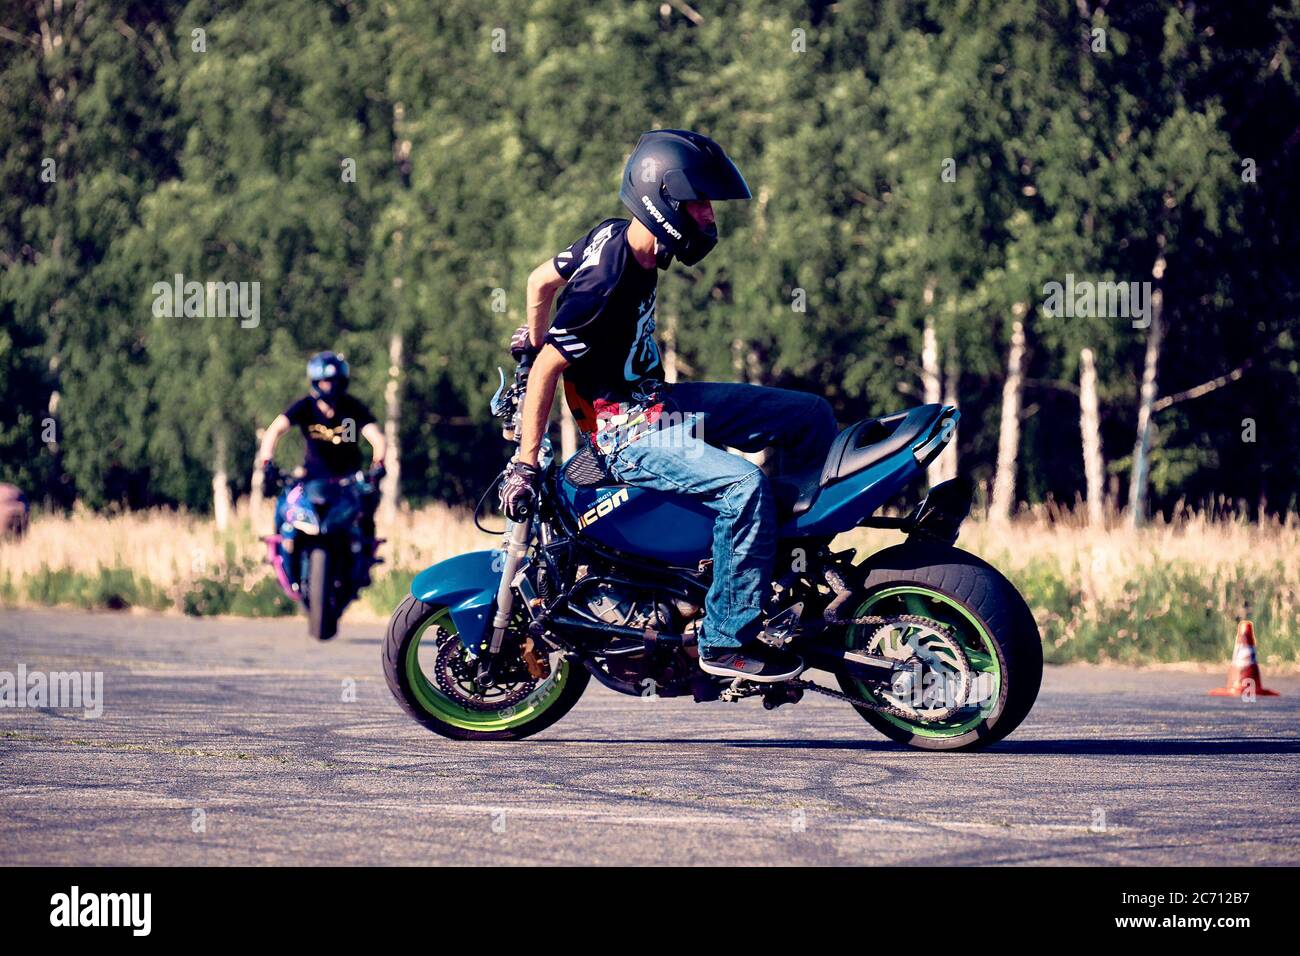 Moscow, Russia - 12 Jul 2020: Moto rider making a stunt on his motorbike.  Stunt motorcycle rider performing motorcycle show. Motorcyclist making doin  Stock Photo - Alamy